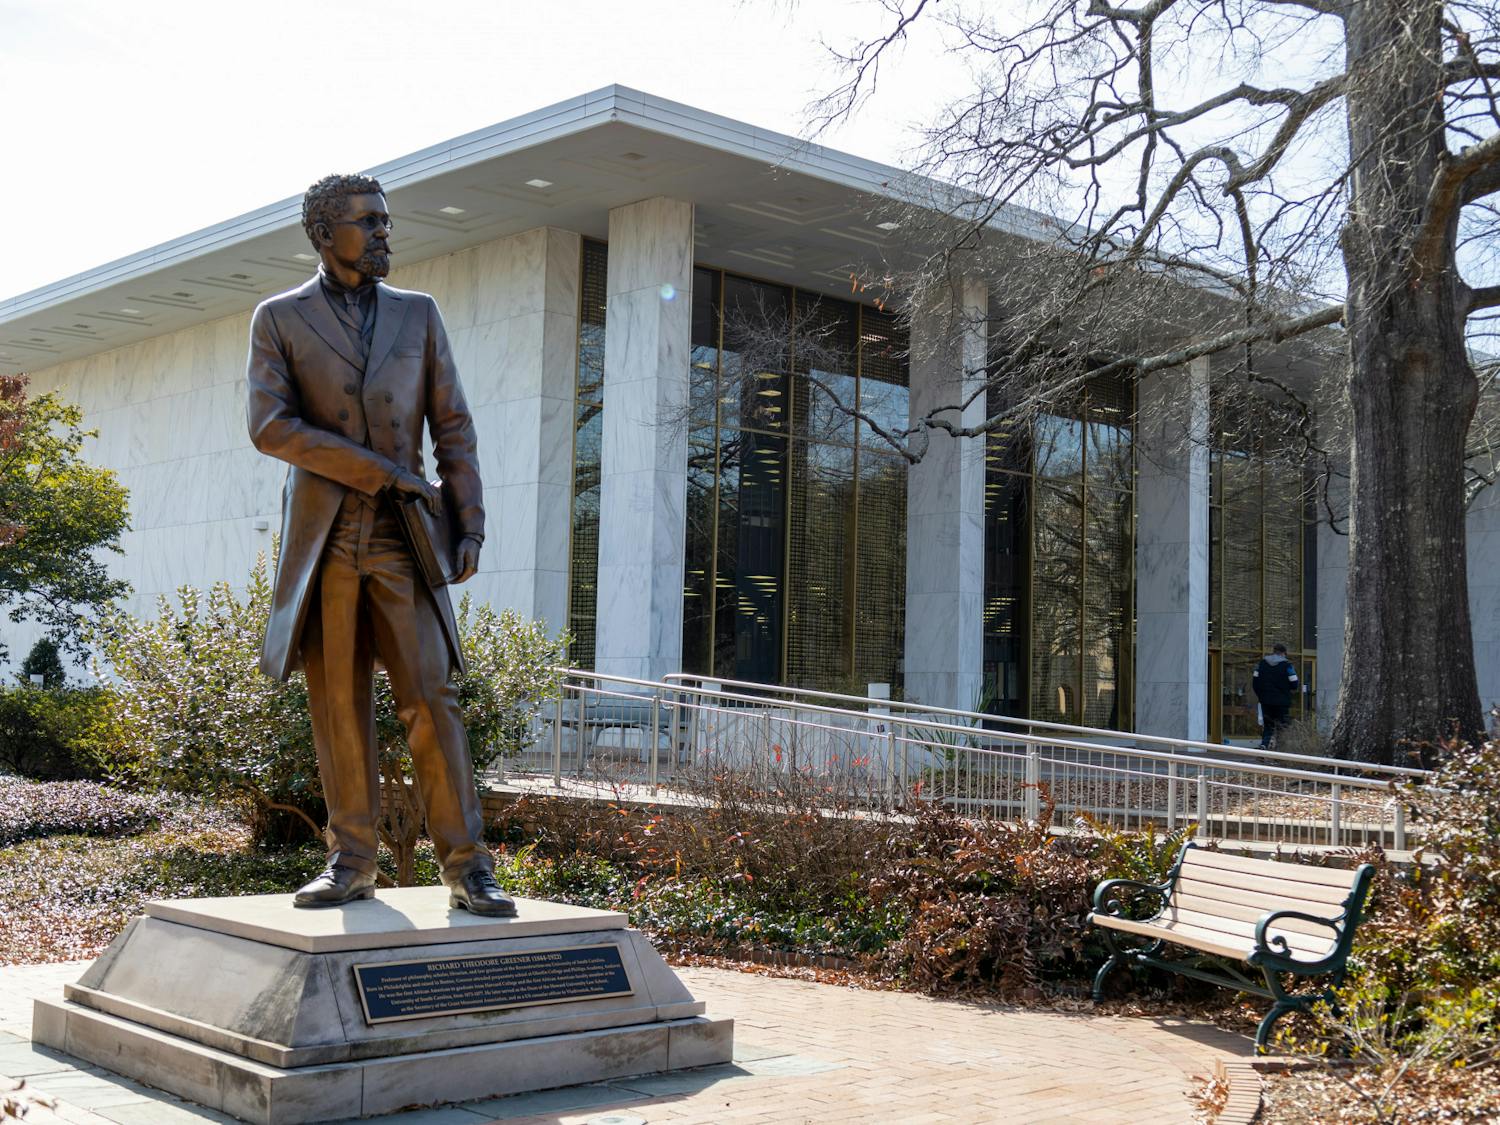 A photo of Thomas Cooper Library on Jan.16, 2023. Thomas Cooper, was the second president of what is now the University of South Carolina. While vocal against the slave trade, upon his immigration he purchased two enslaved families and wrote about how good slavery is.  